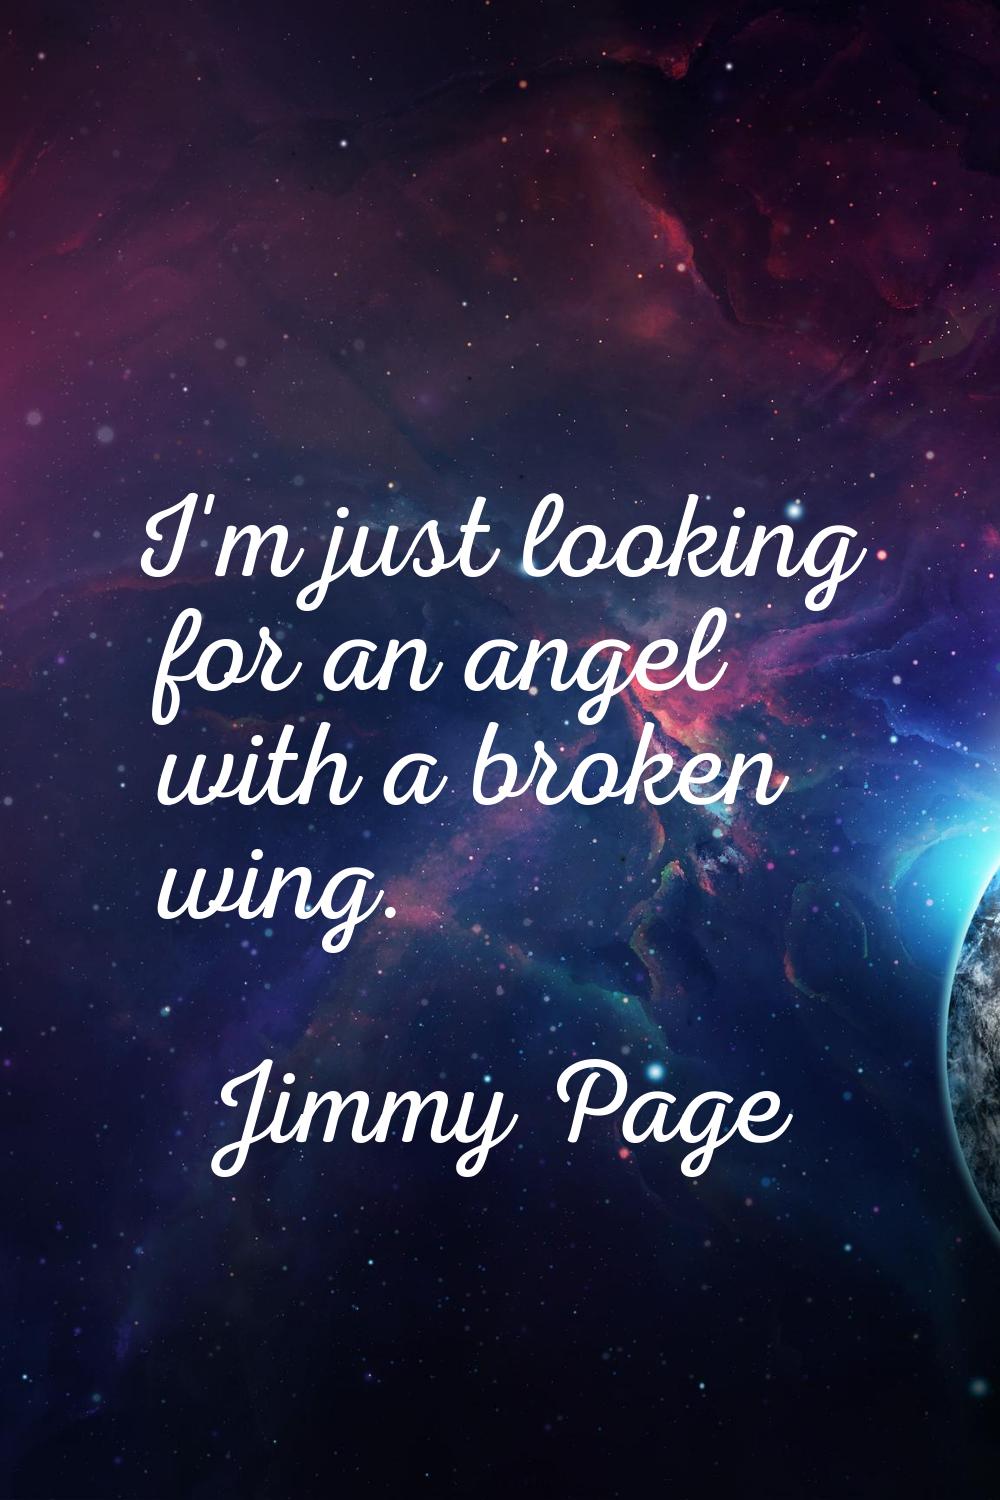 I'm just looking for an angel with a broken wing.